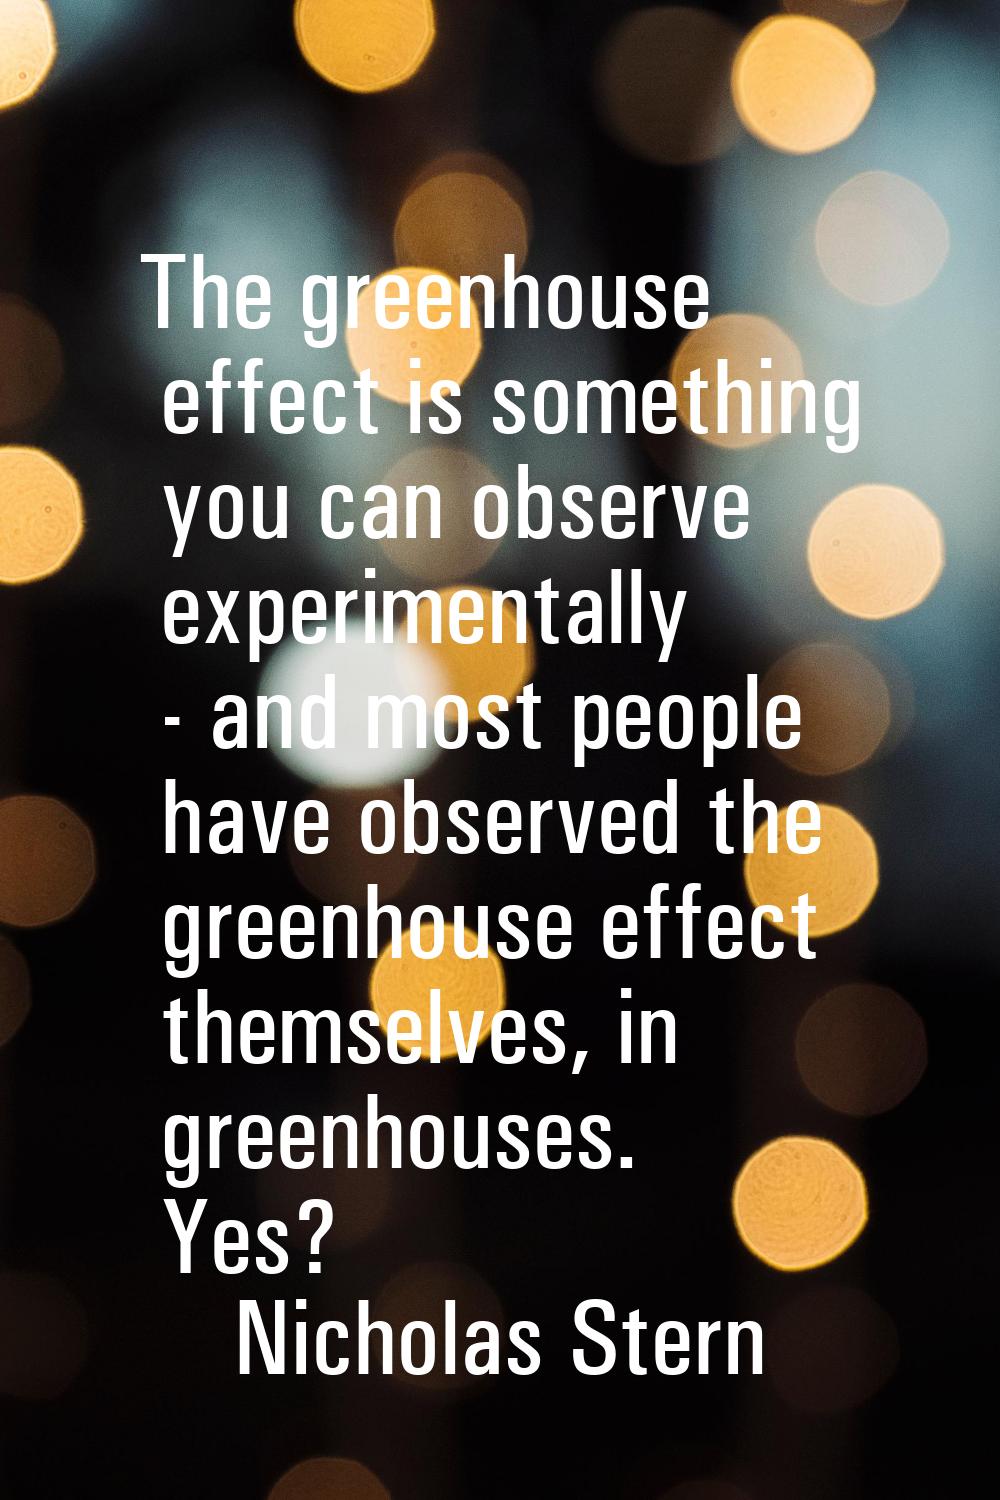 The greenhouse effect is something you can observe experimentally - and most people have observed t